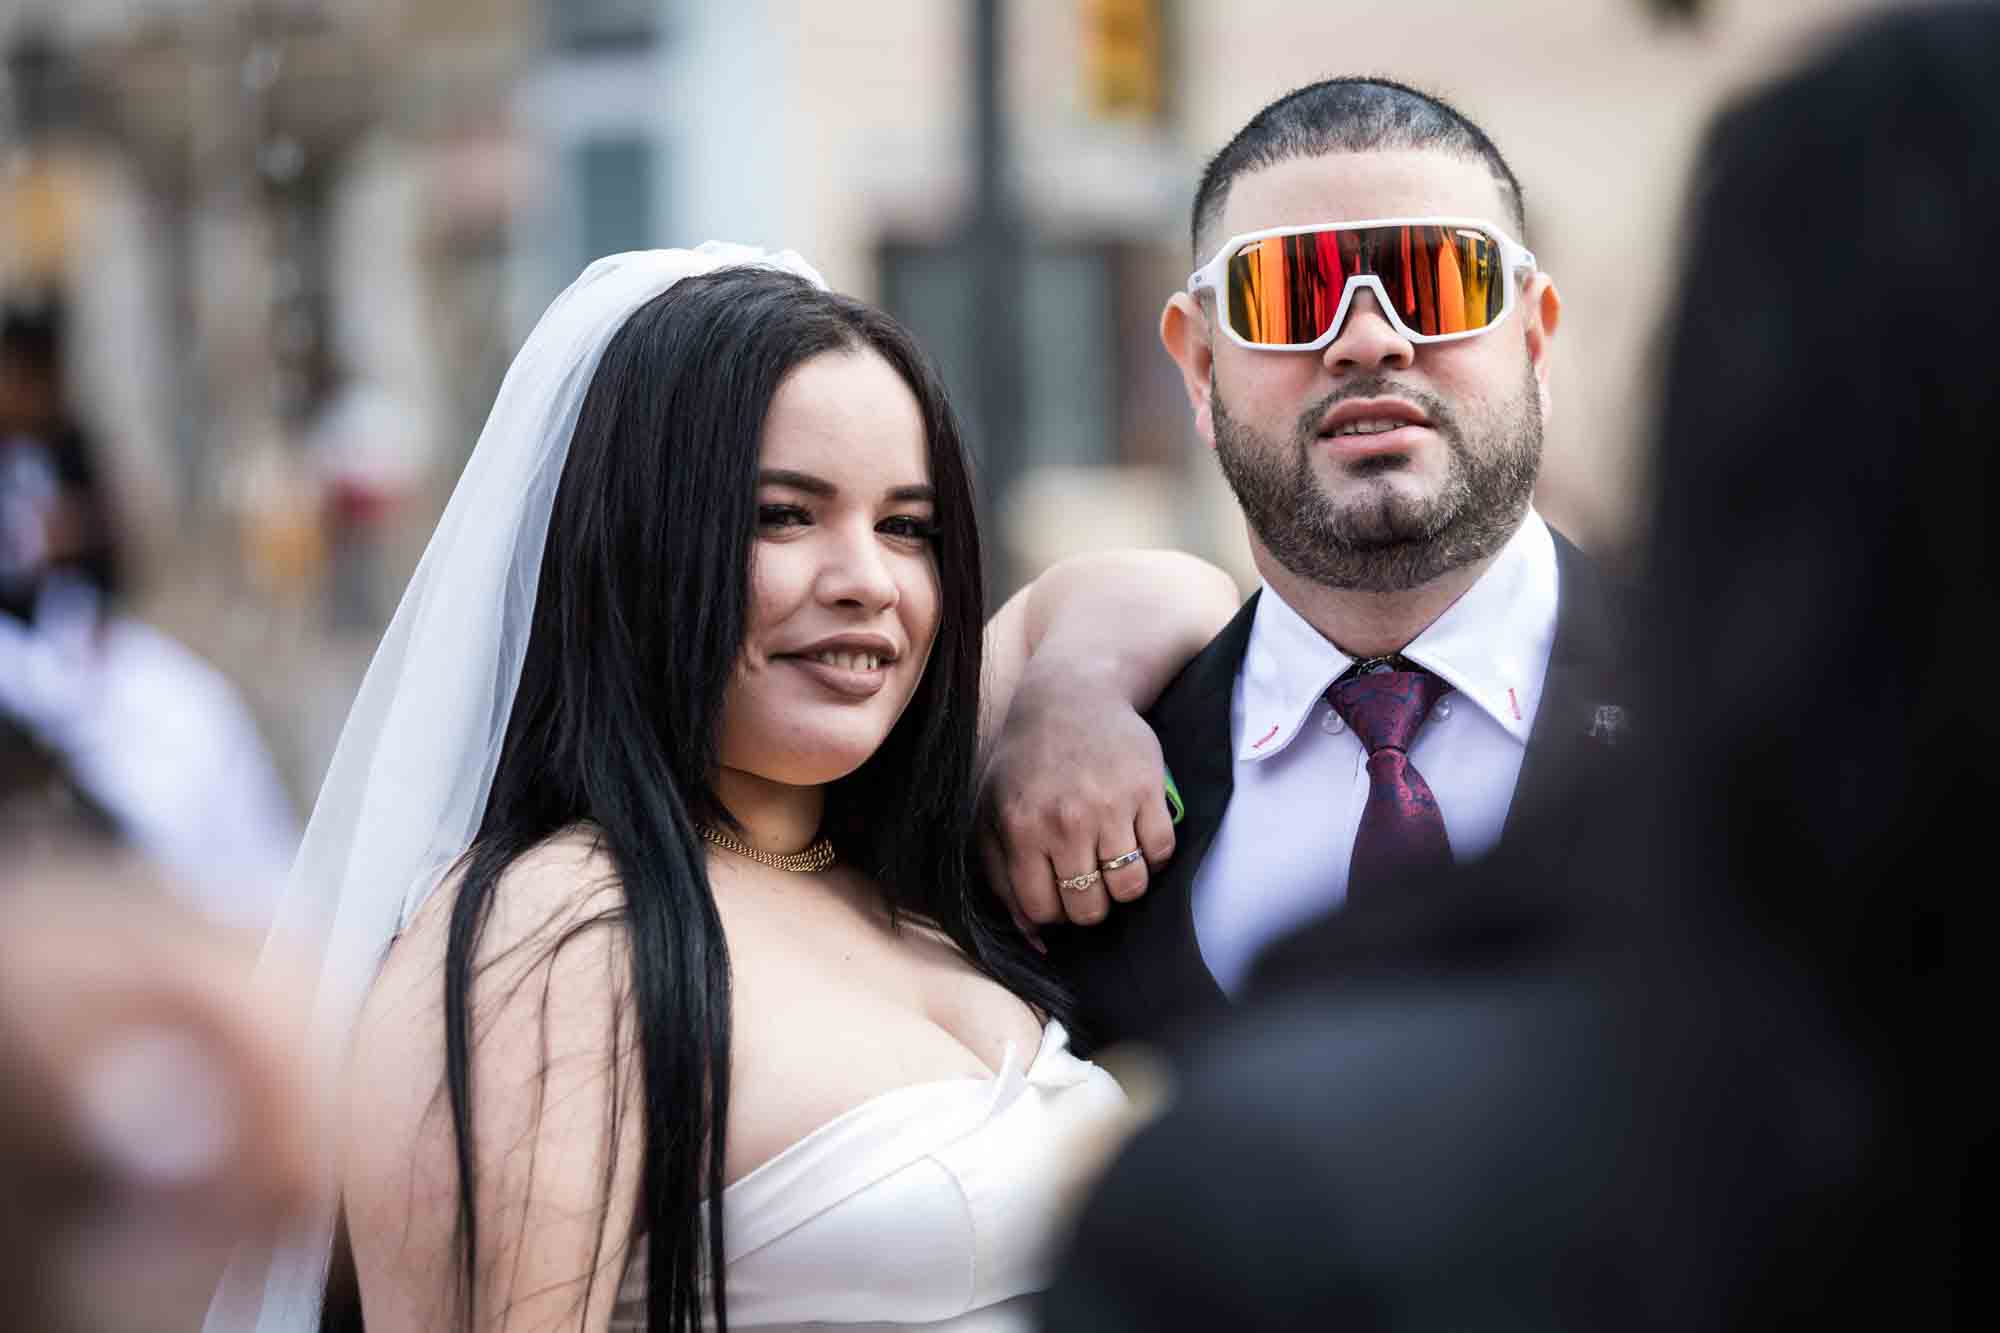 Bride hanging on shoulder of groom wearing large reflective sunglasses for an article on the Bexar county mass wedding event